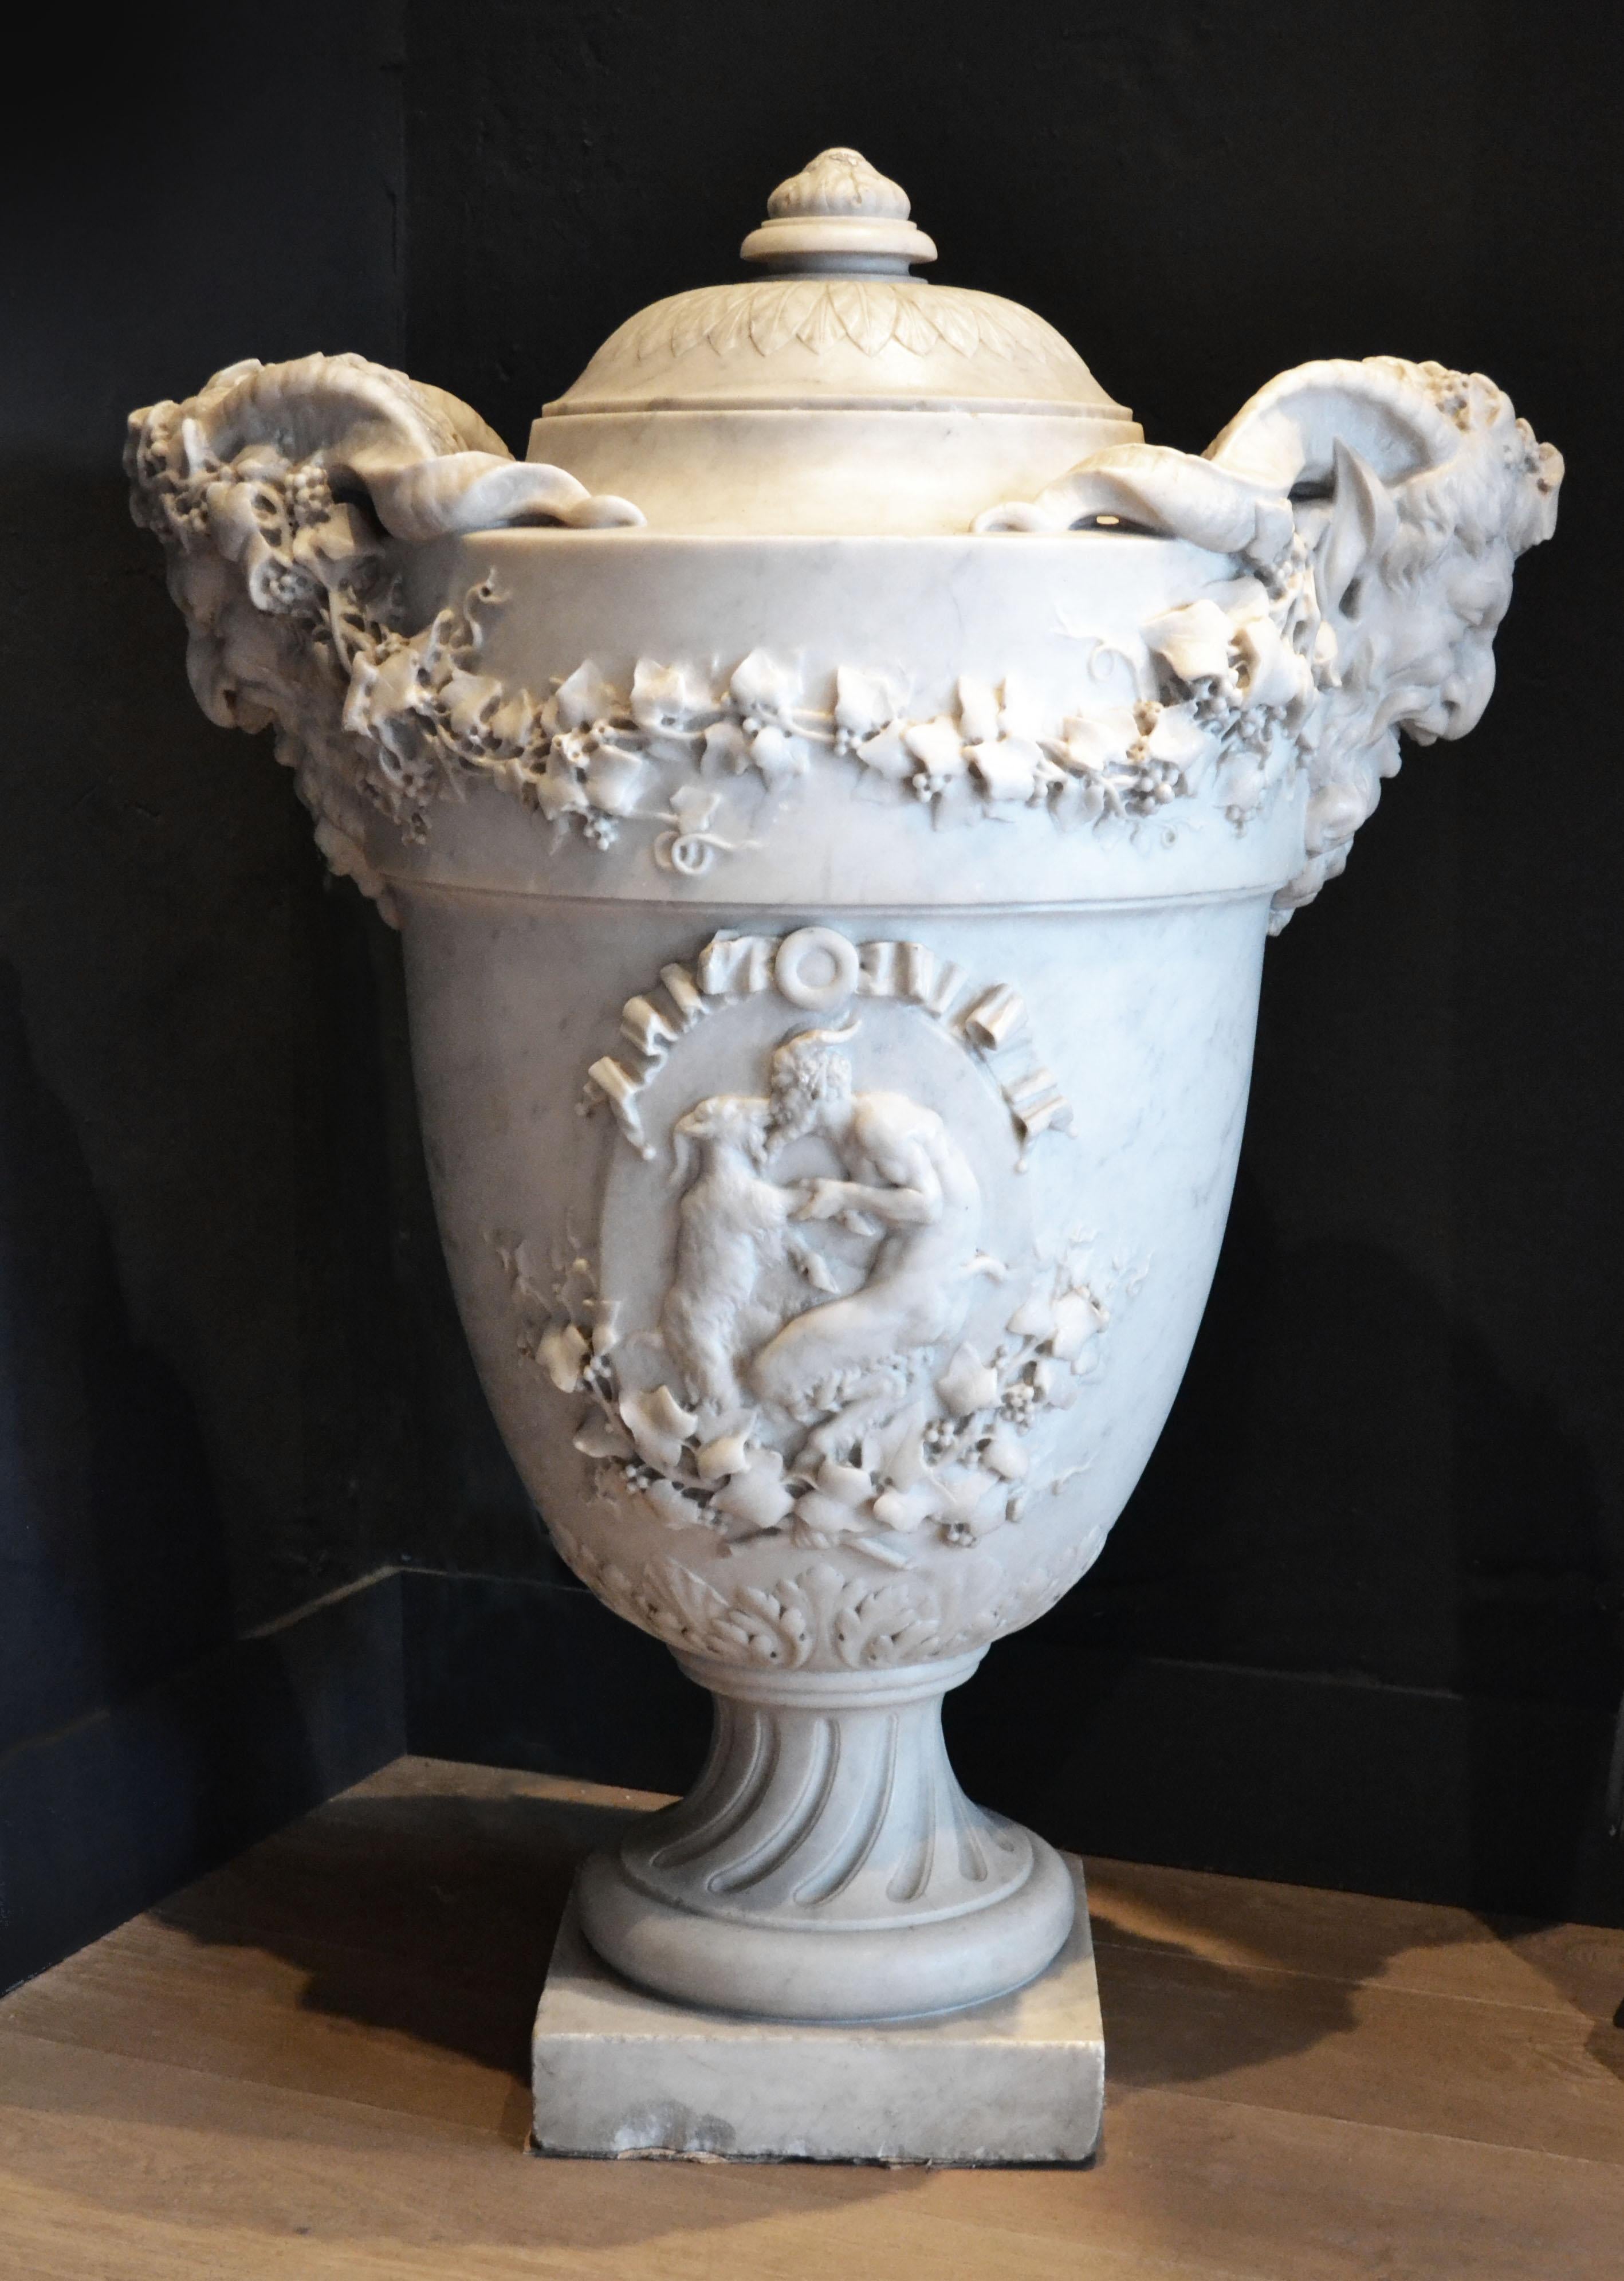 An impressive 19th century Carrara marble lidded company urn. The fine quality carving depicts a dancing faun and the urn is flanked by two satire heads draped with ivy leaf decoration.